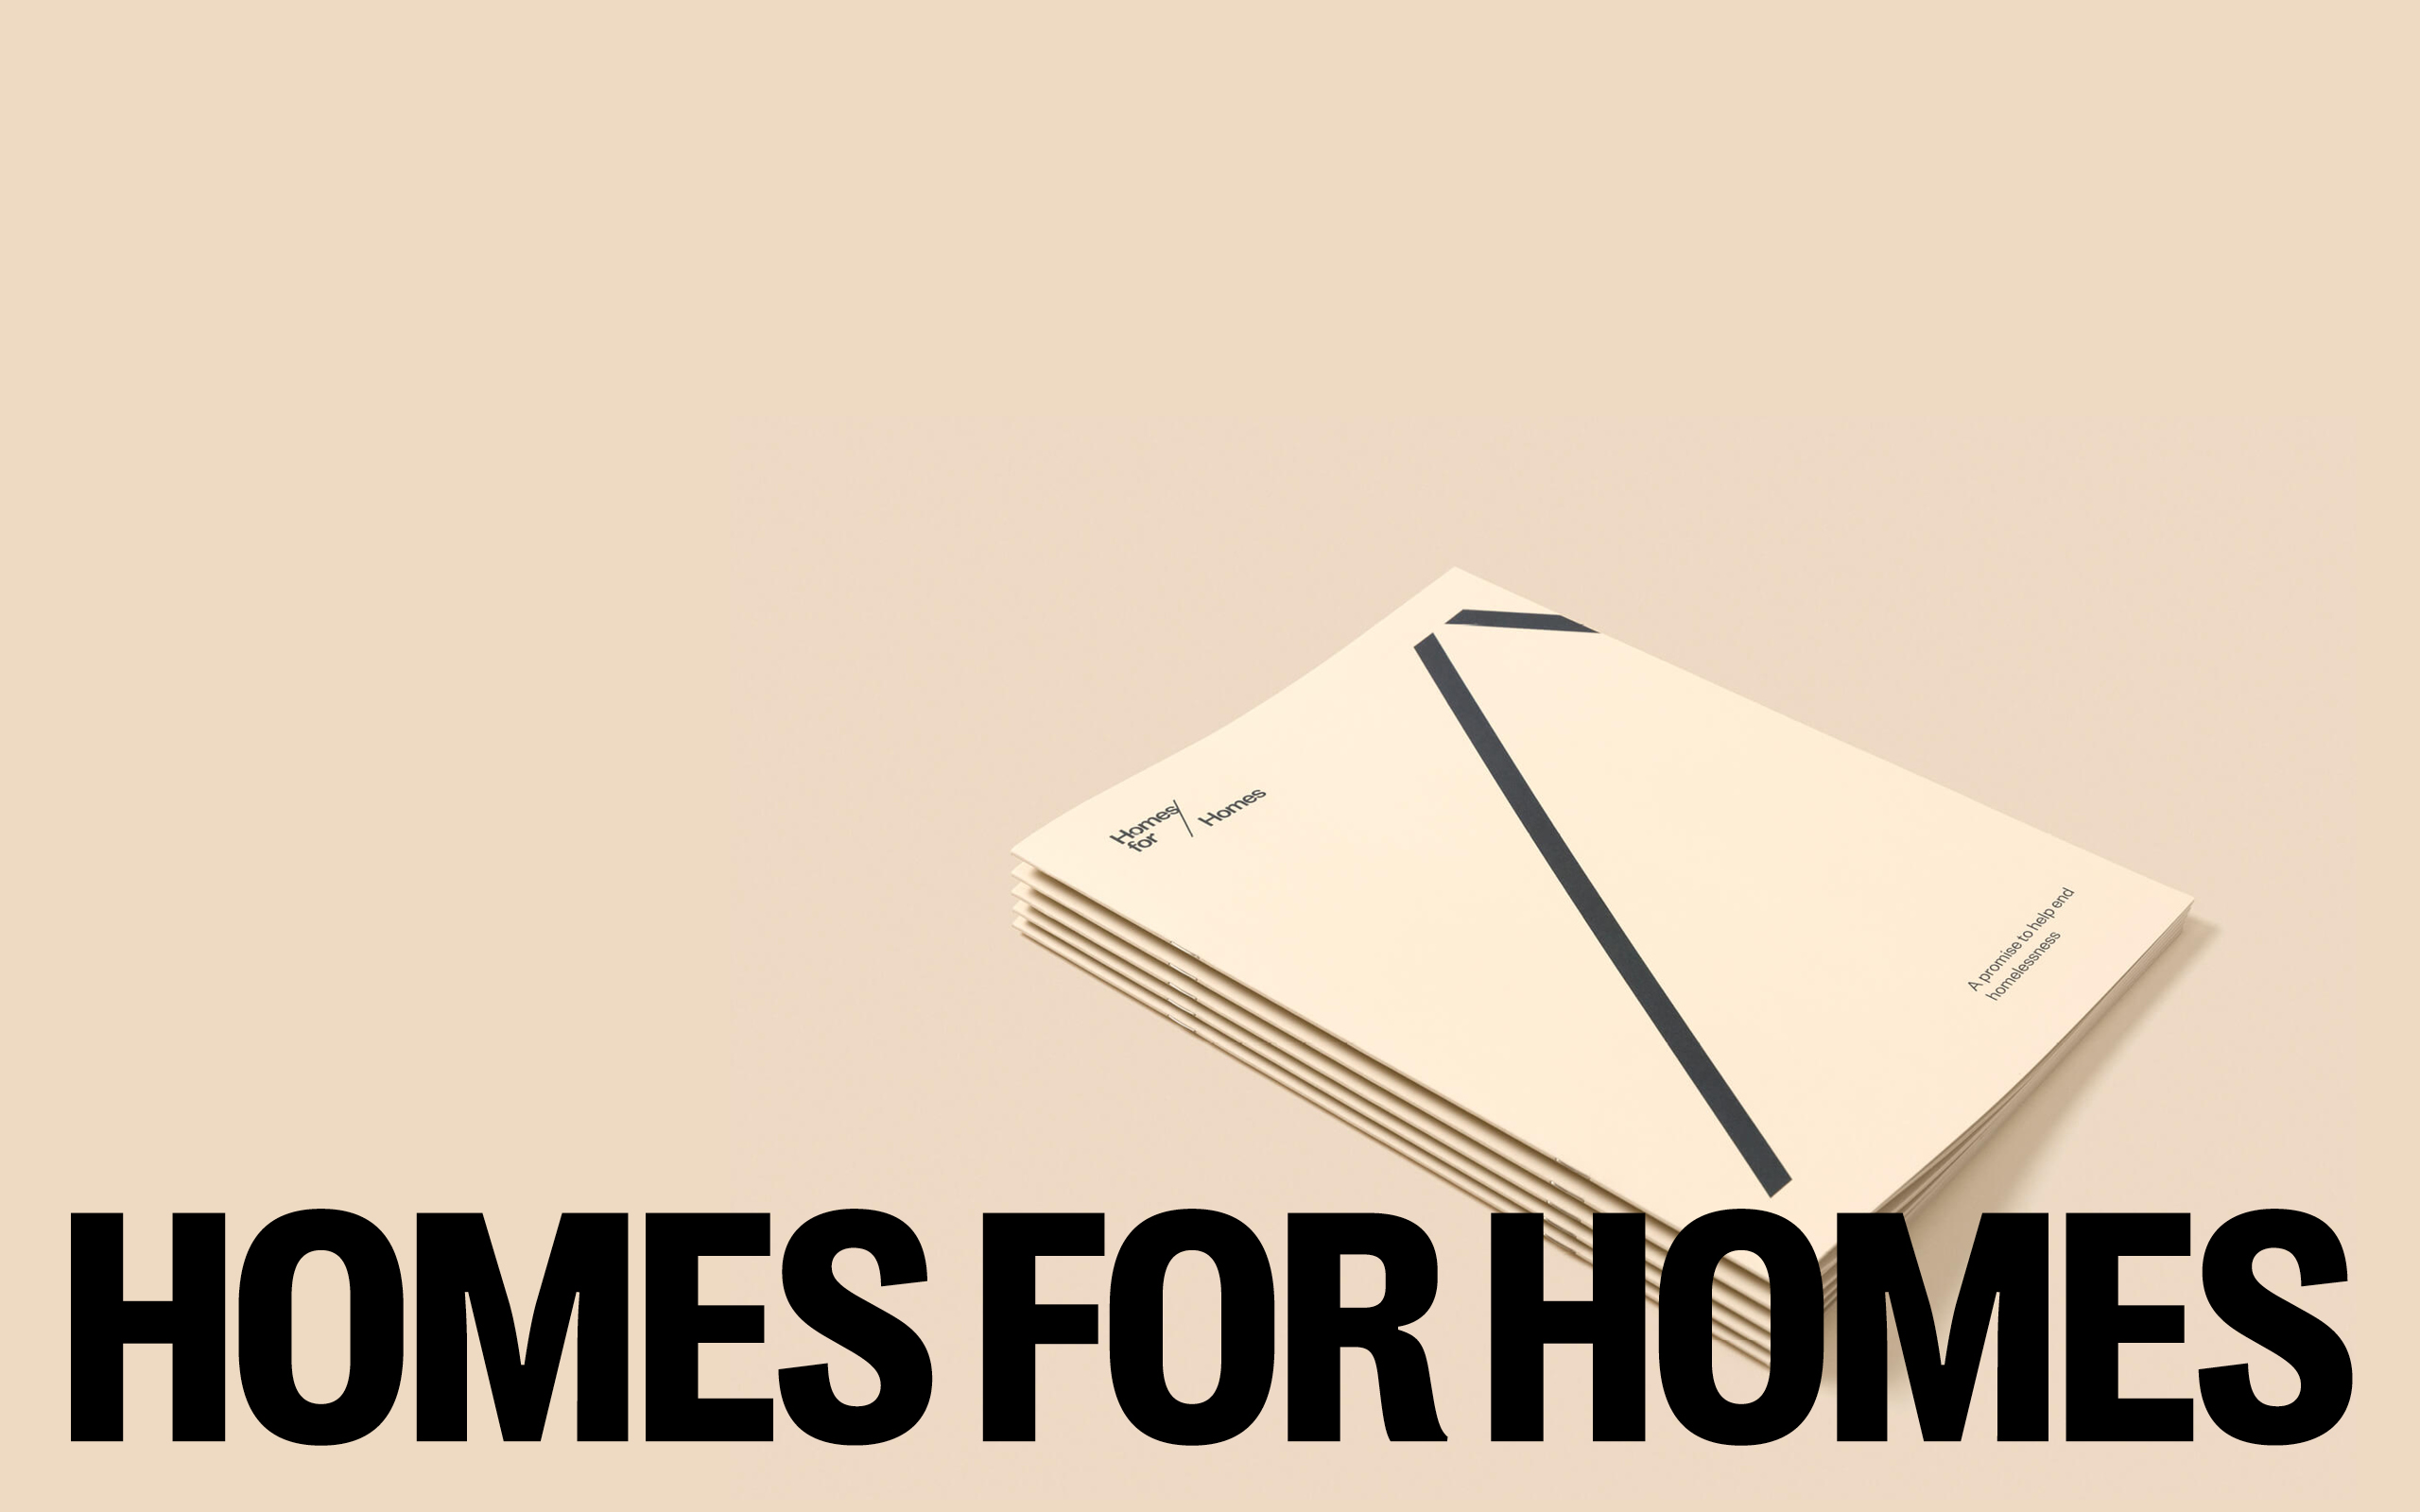 Homes for Homes